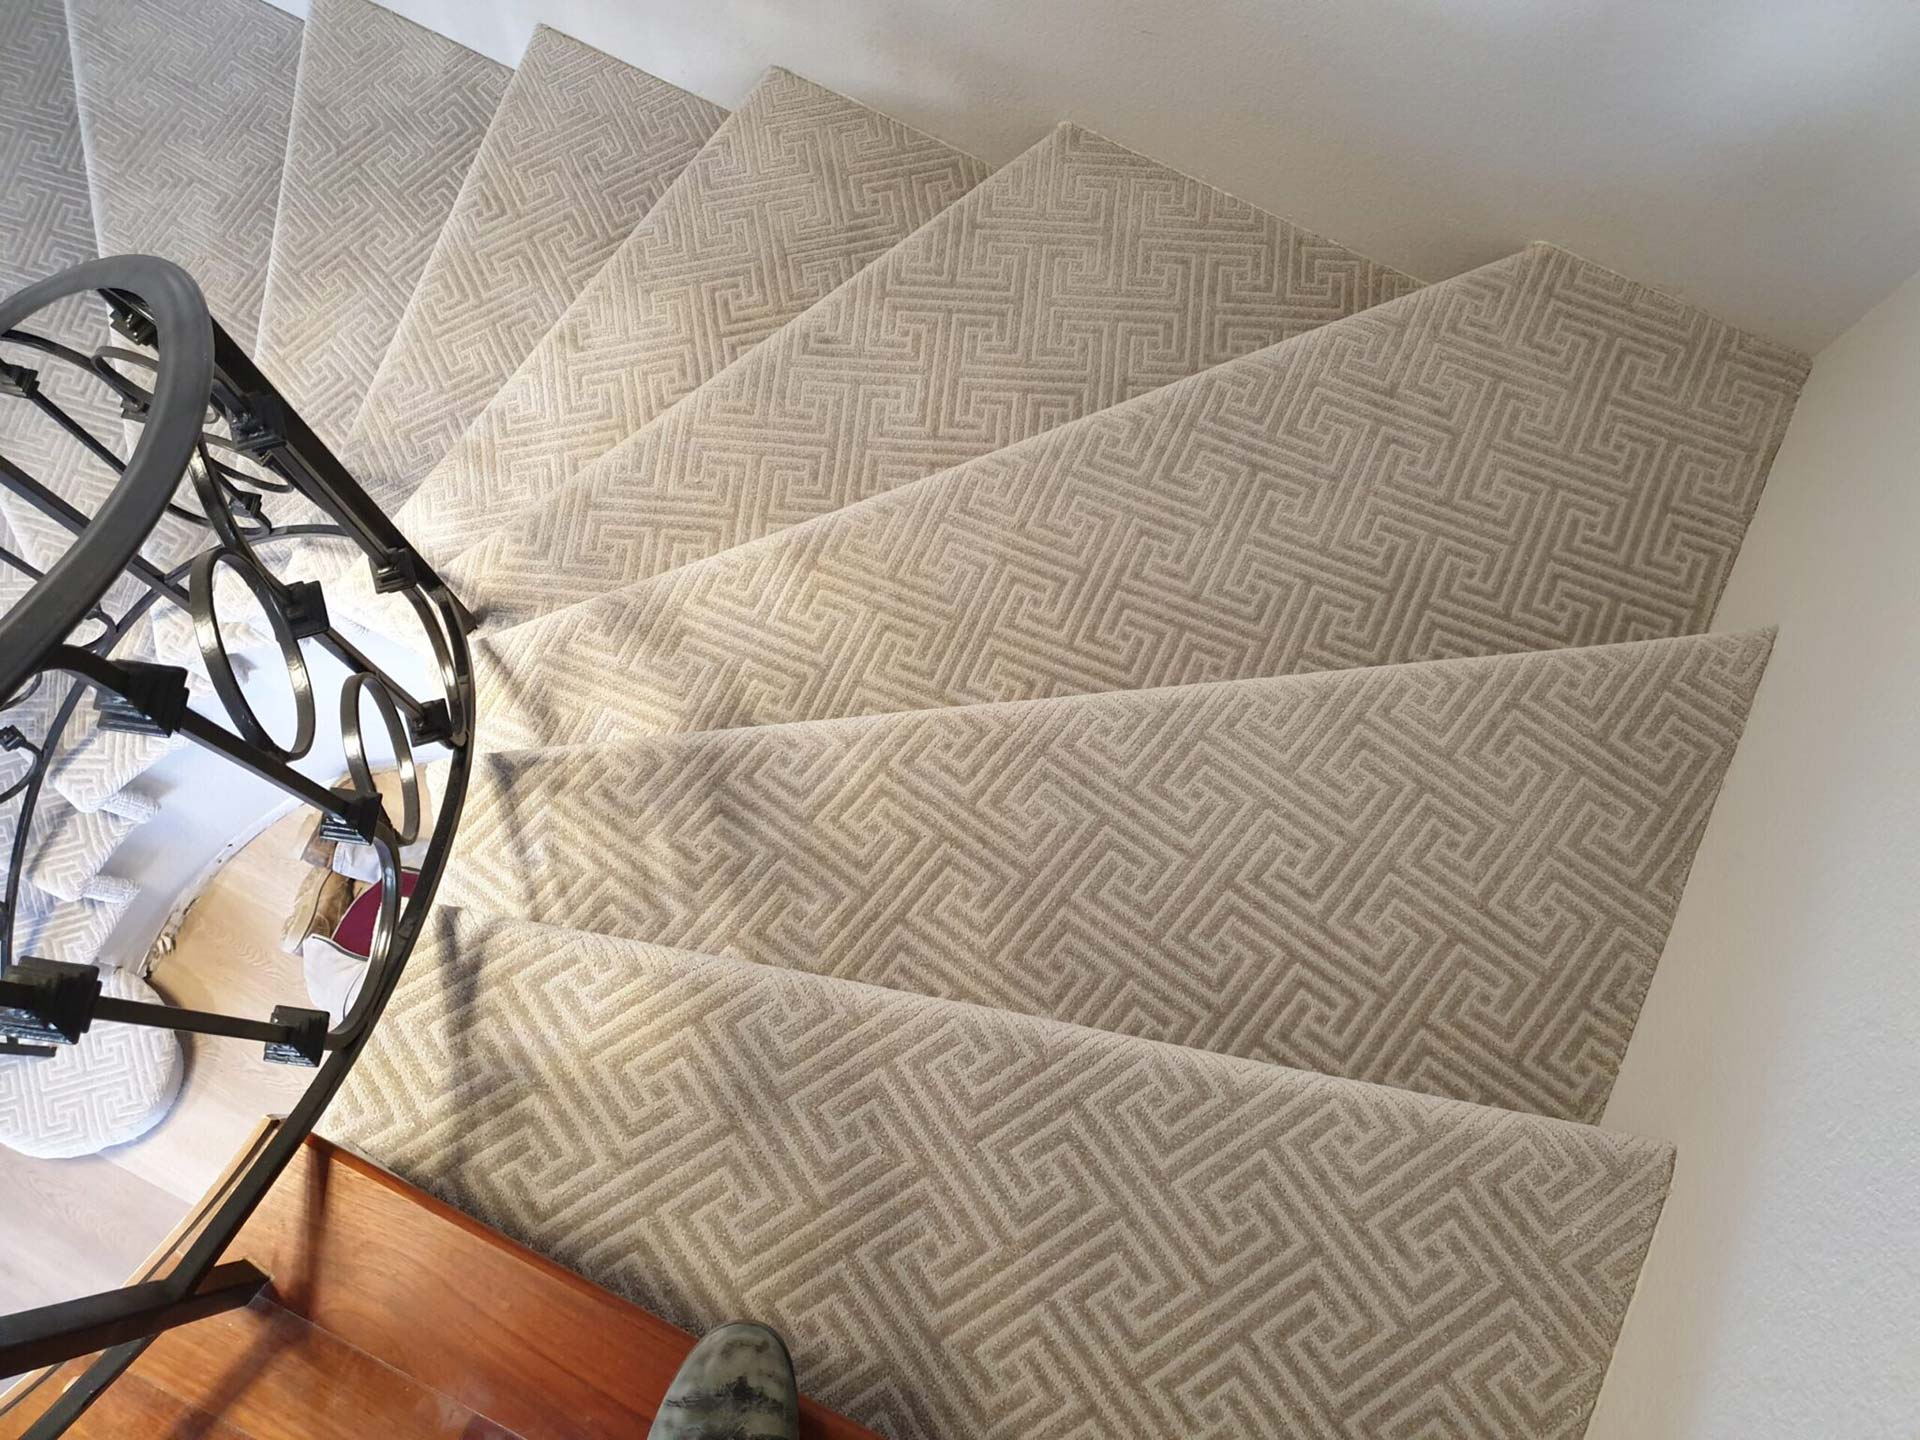 Mountain View Carpet Flooring on Stairs